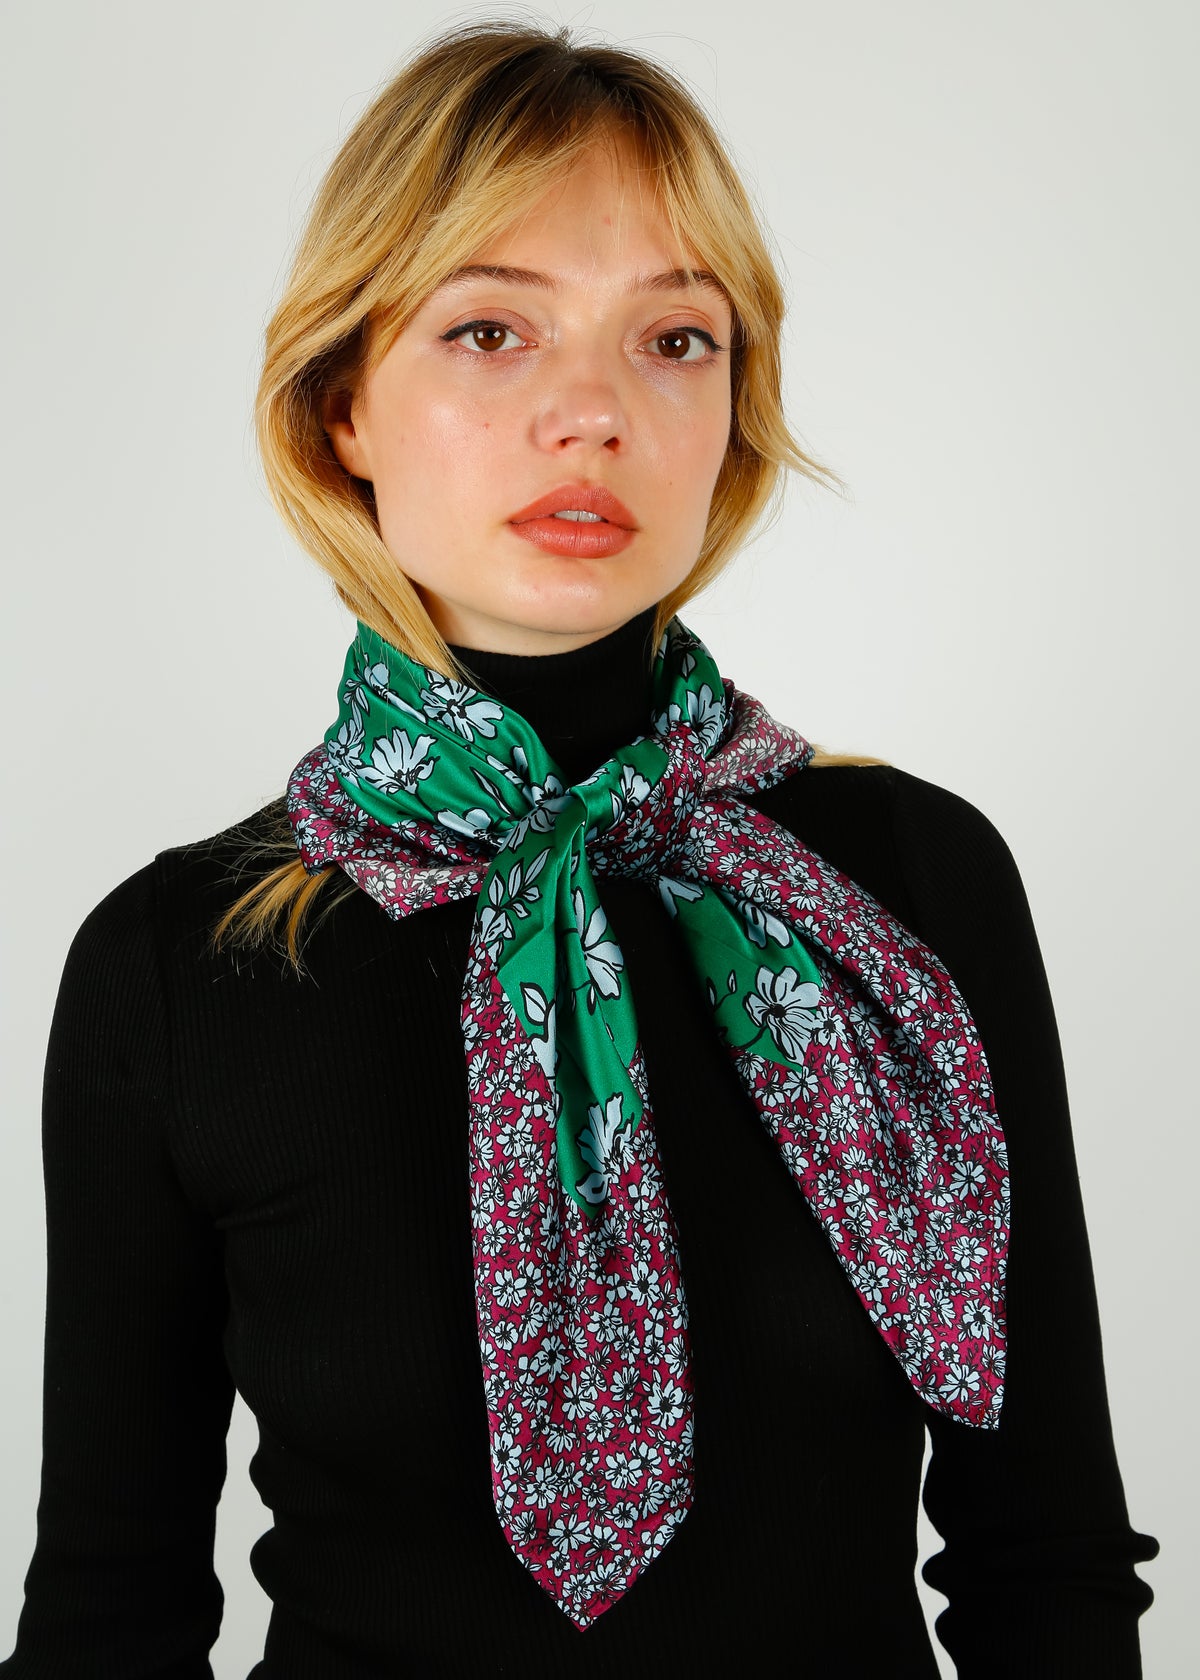 PPL Pheobe Large Scarf in Sketch Floral, Ditsy Purple, Green, Blue